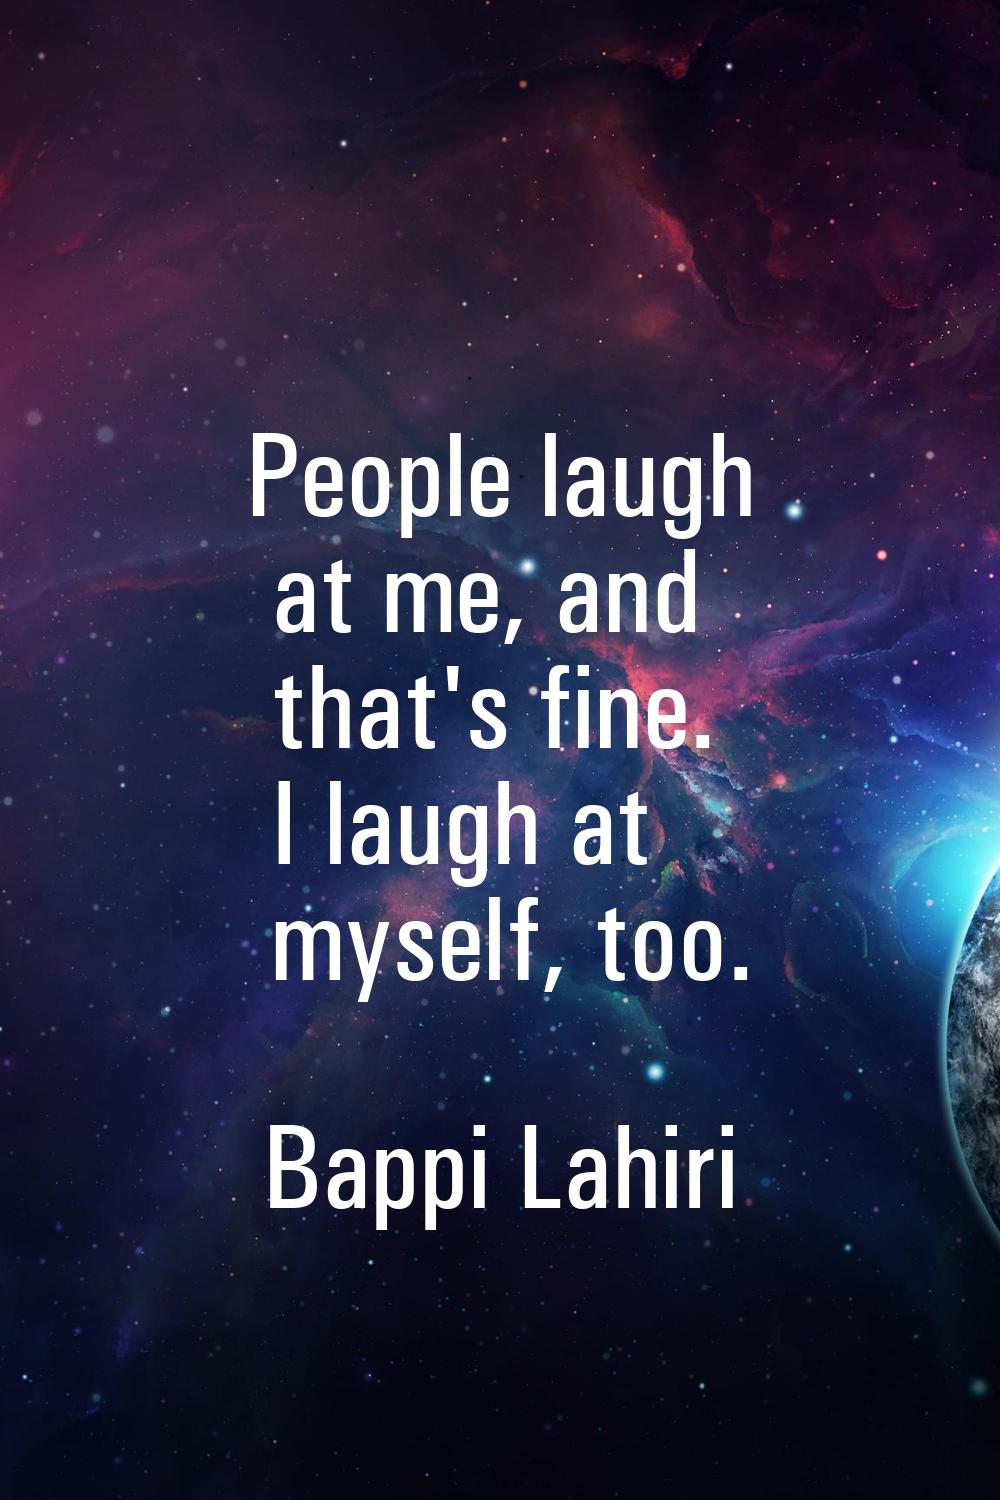 People laugh at me, and that's fine. I laugh at myself, too.